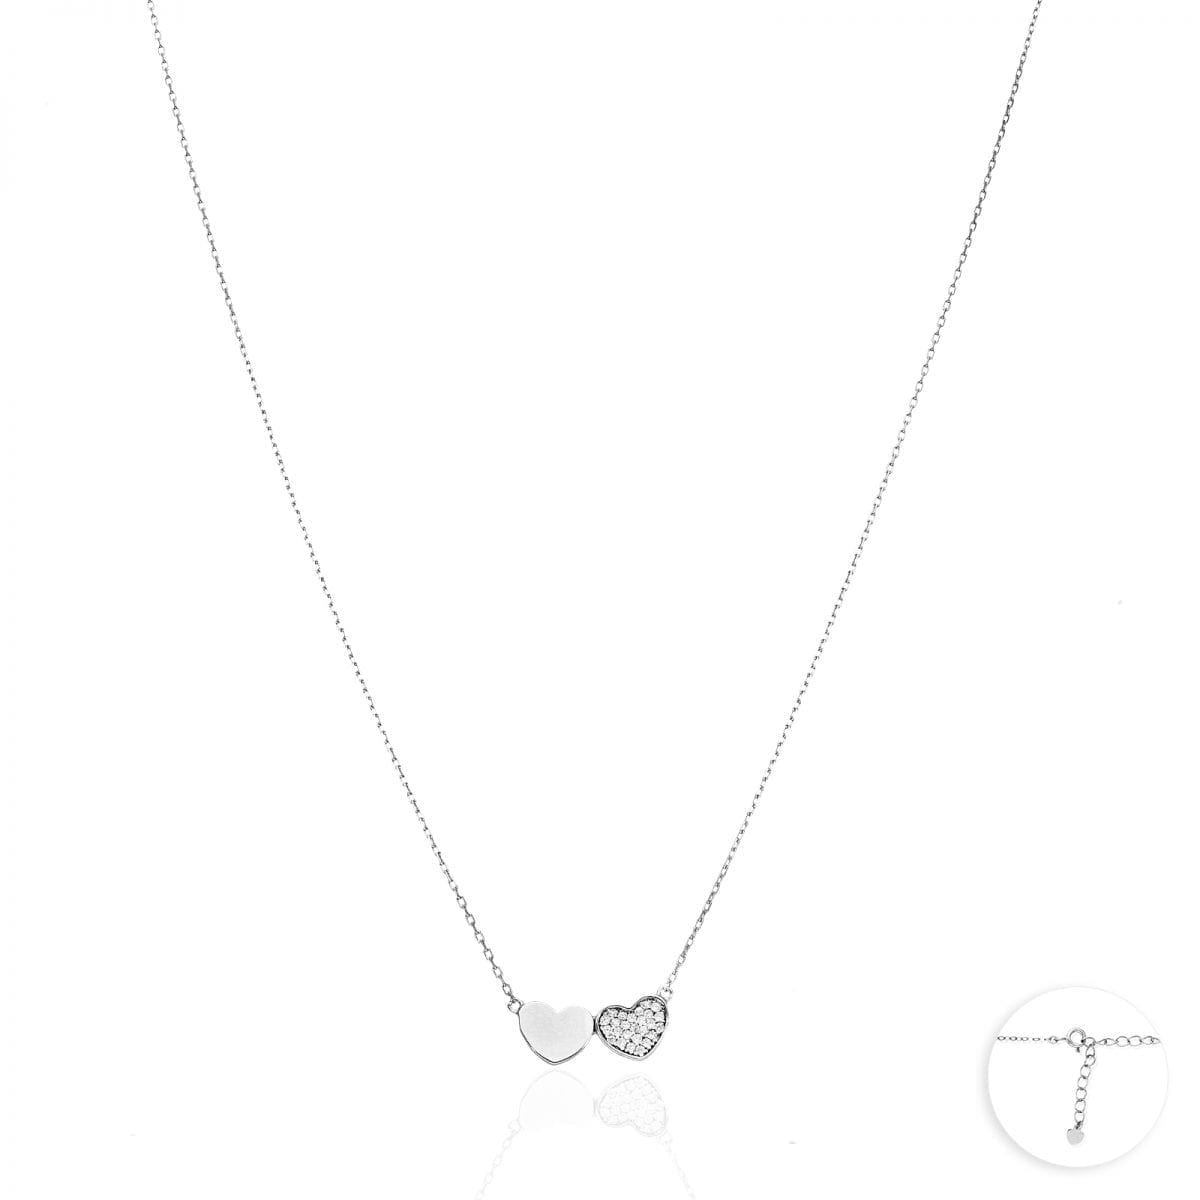 Rose Gold & White Gold Over 925 Sterling Silver CZ Heart Cable Necklace 18" - Rhodium Plated